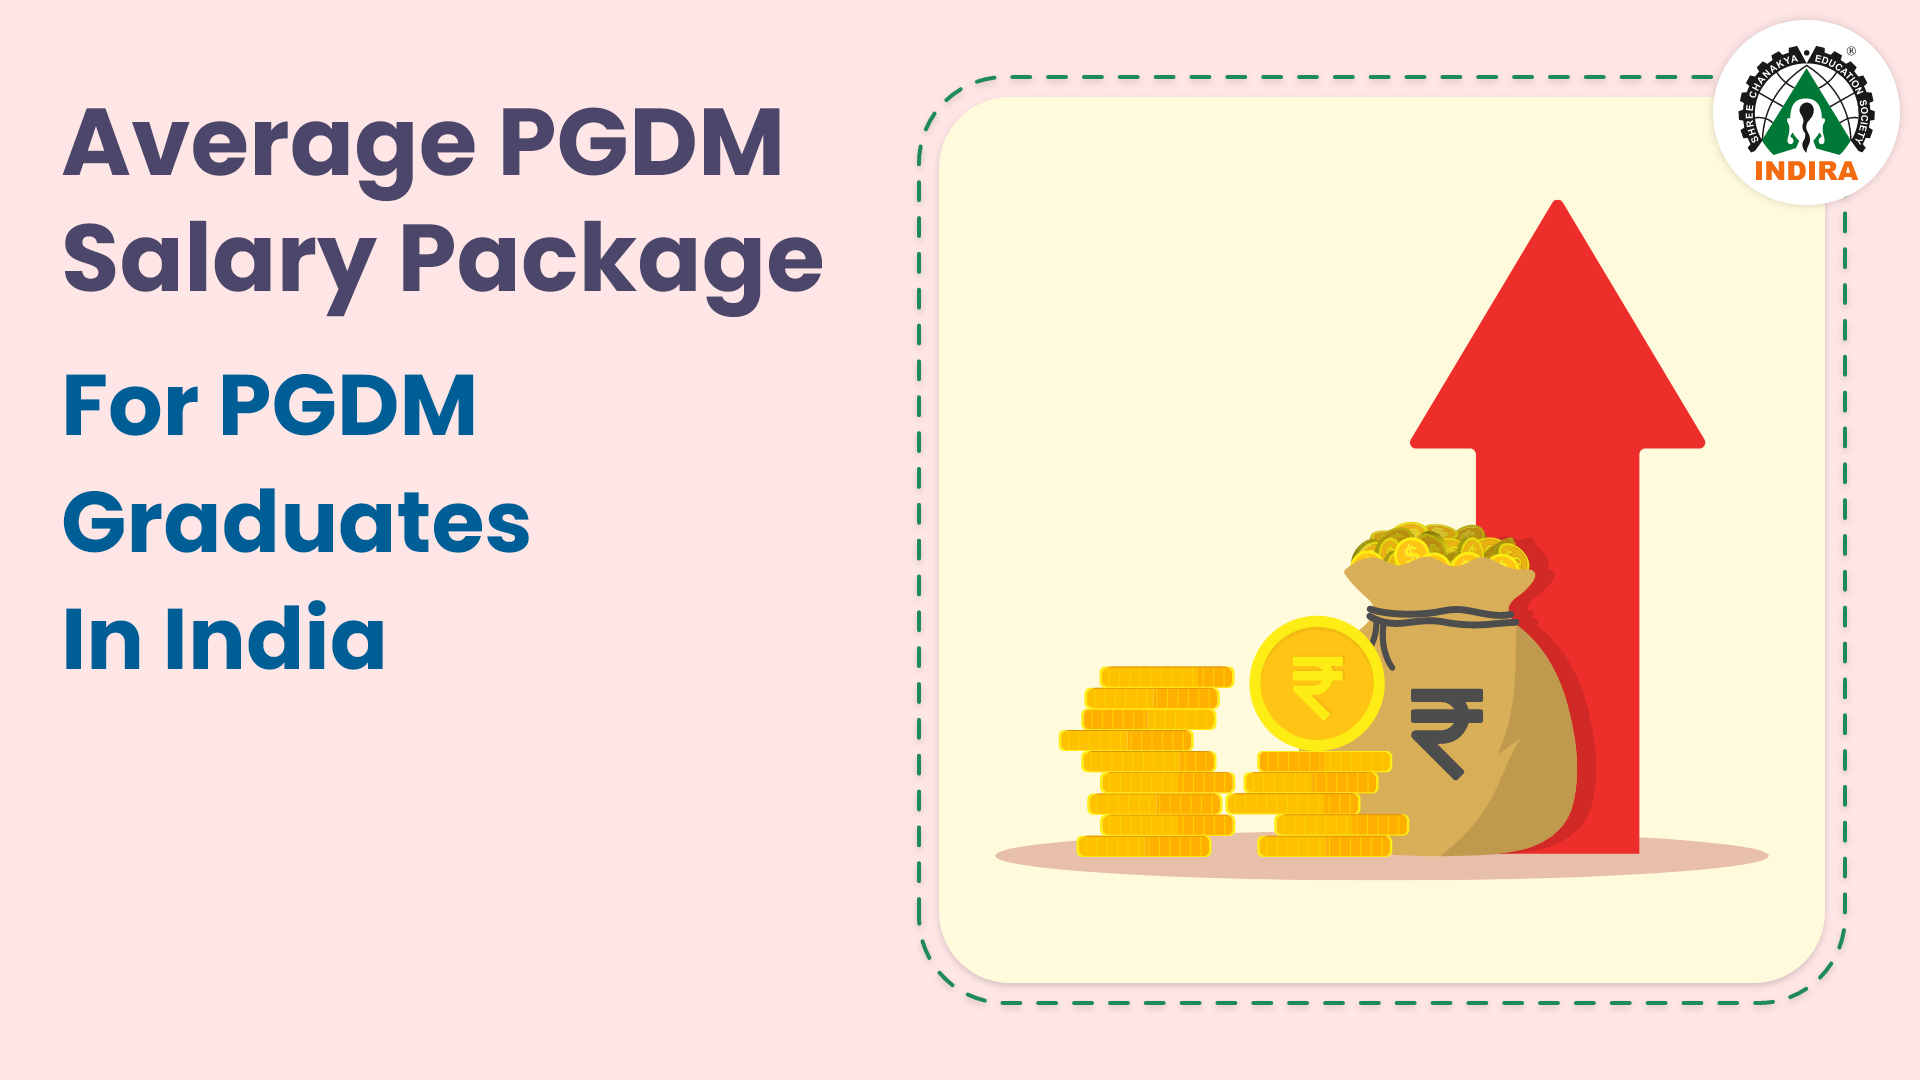 Average PGDM Salary package for PGDM graduates in India